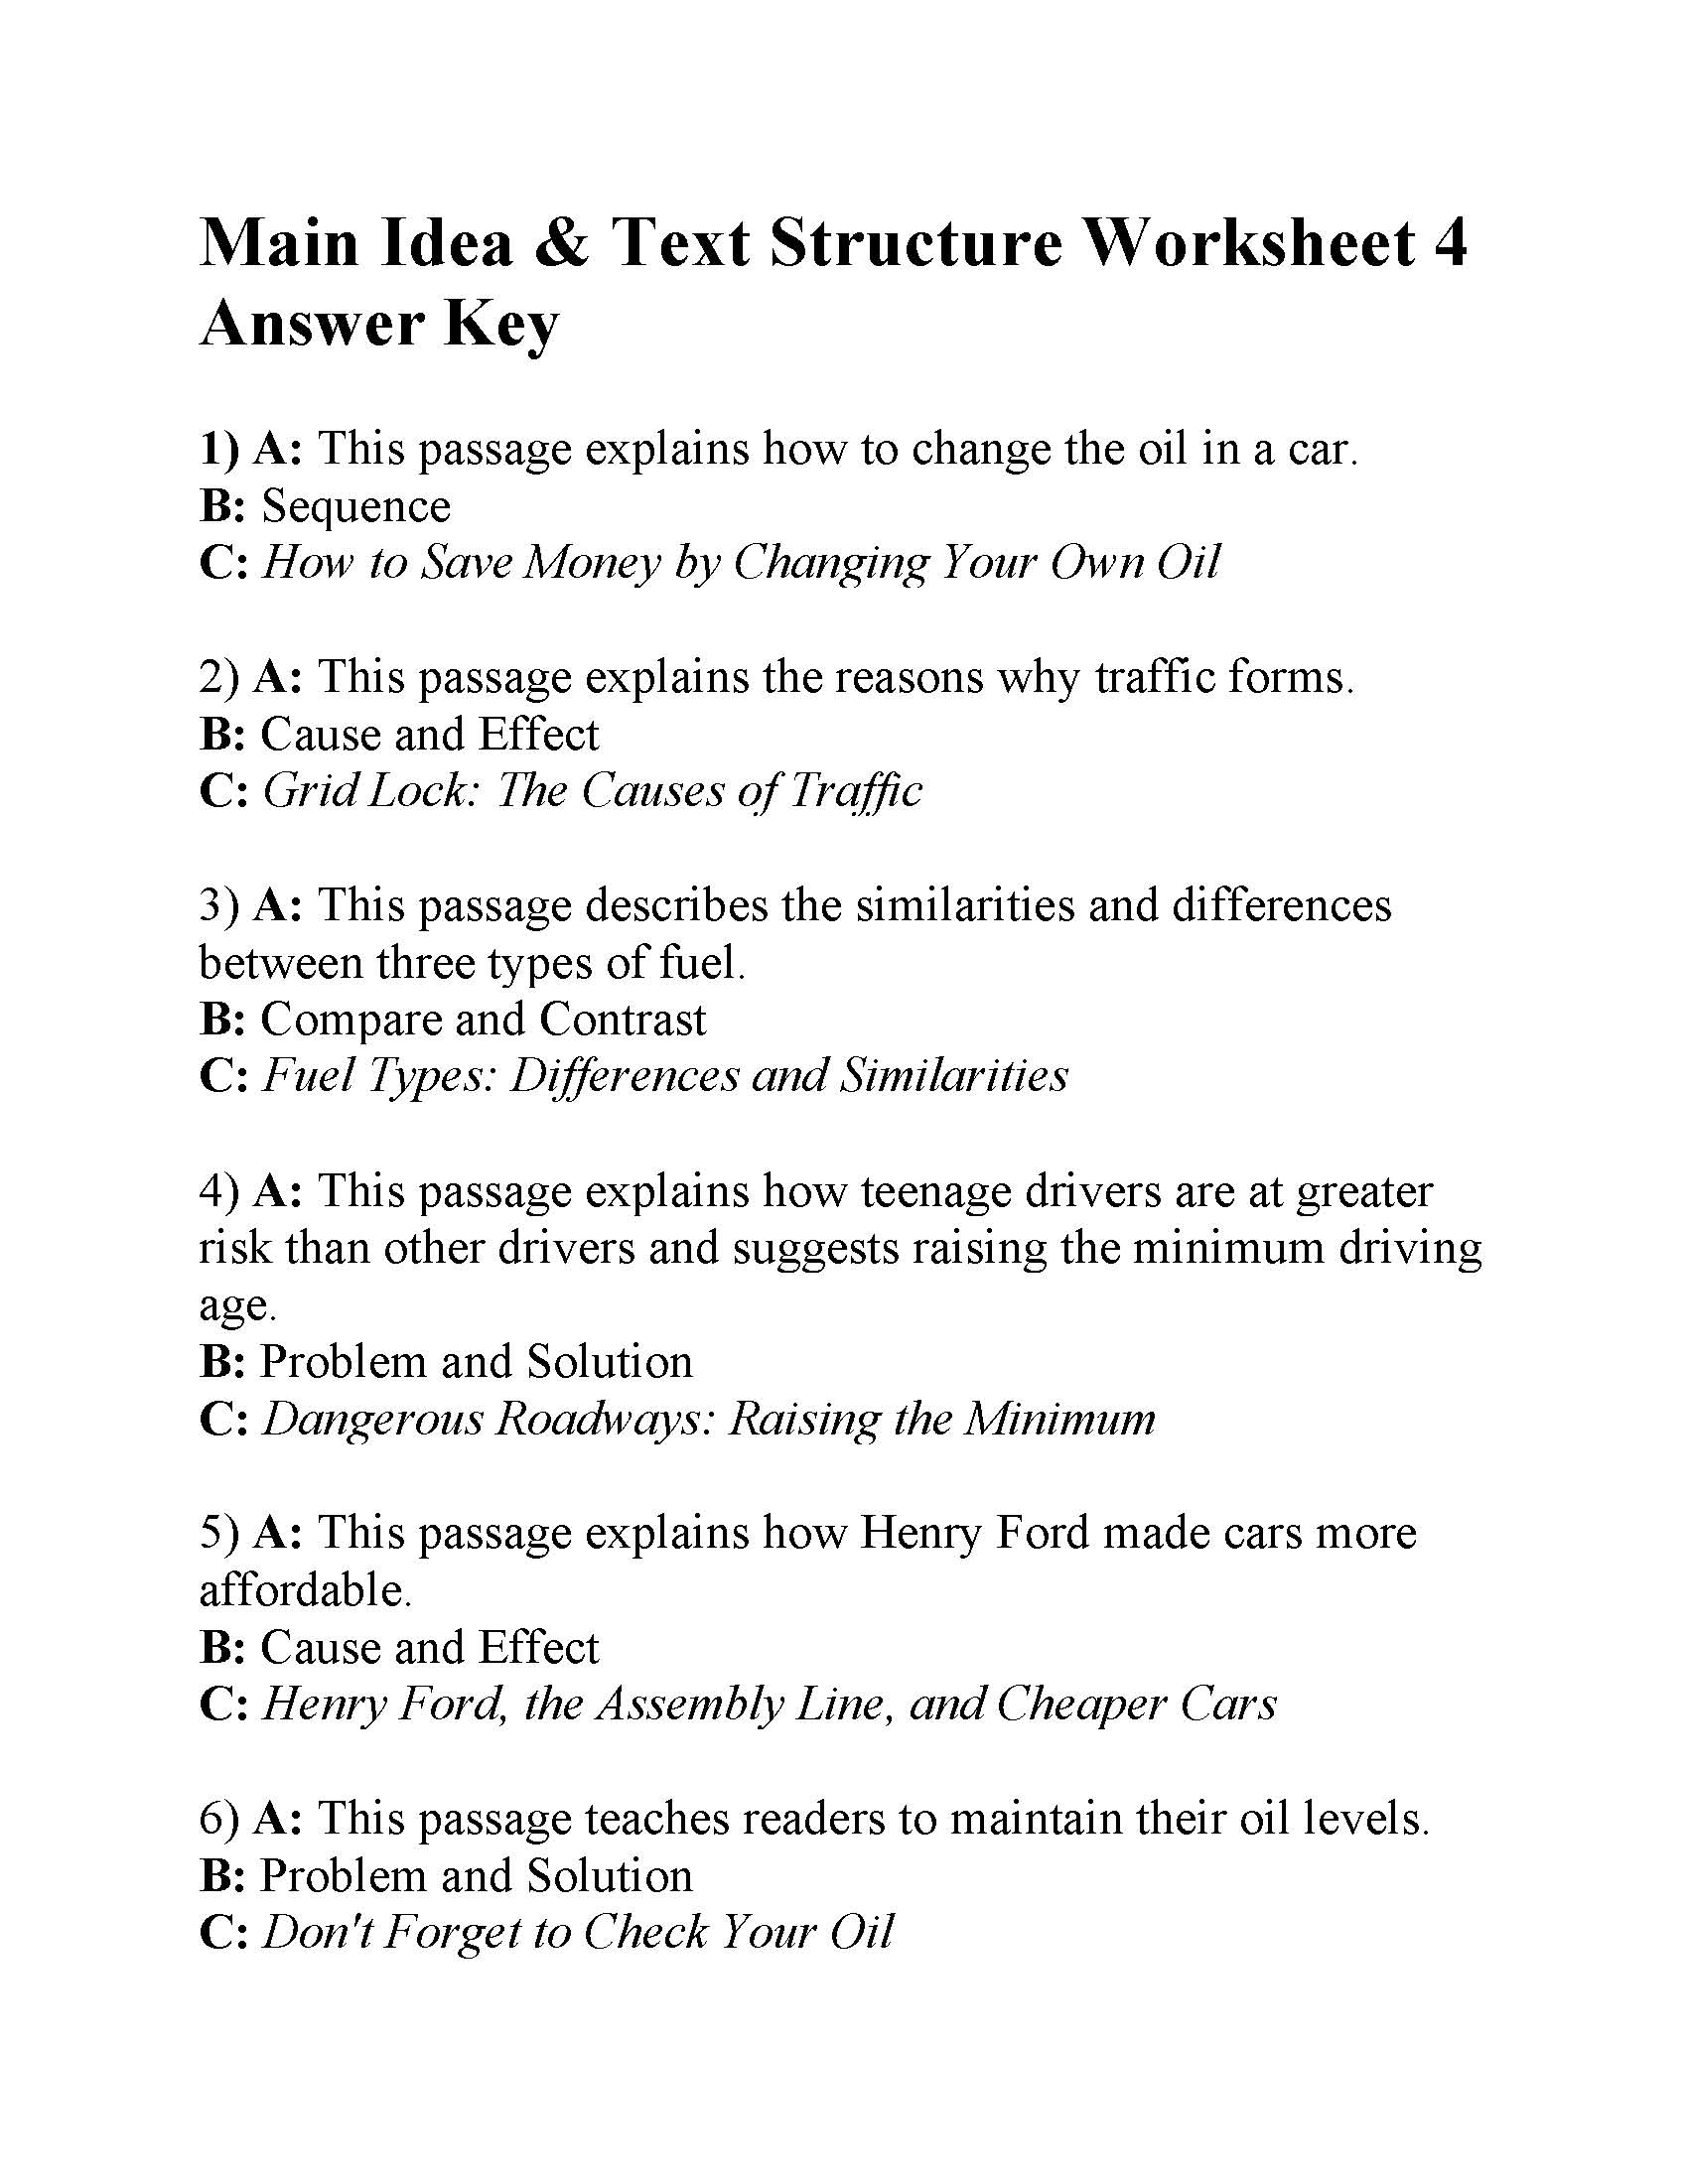 Main Idea and Text Structure Worksheet 11  Answers Throughout Main Idea Worksheet 4